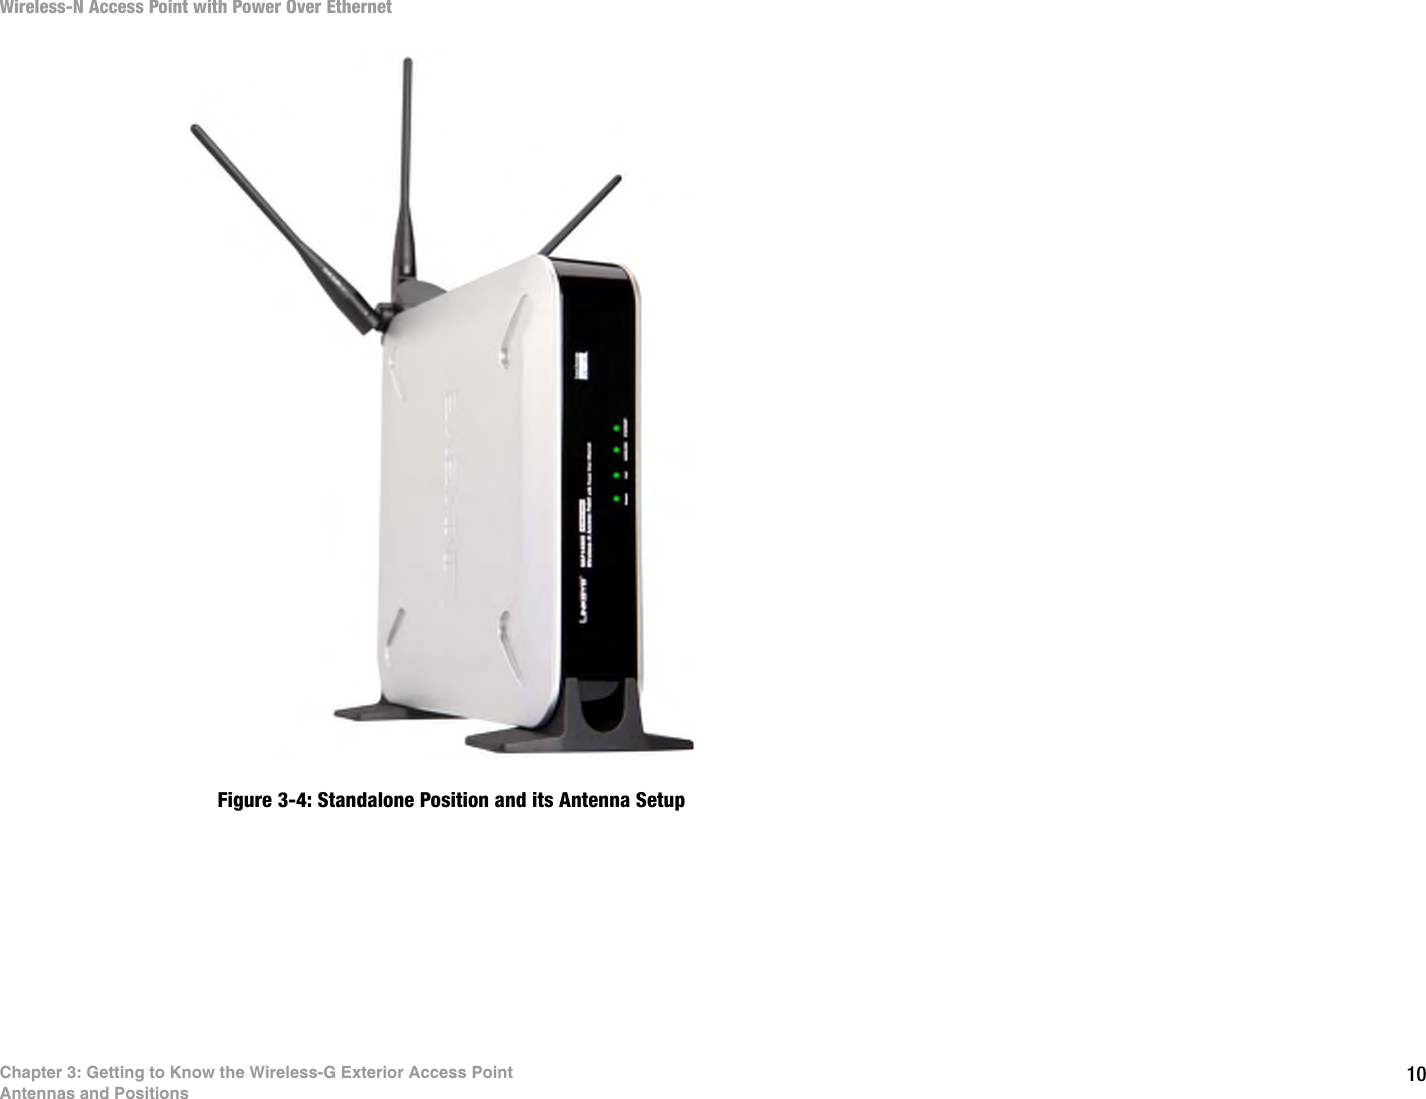 10Chapter 3: Getting to Know the Wireless-G Exterior Access PointAntennas and PositionsWireless-N Access Point with Power Over EthernetFigure 3-4: Standalone Position and its Antenna Setup